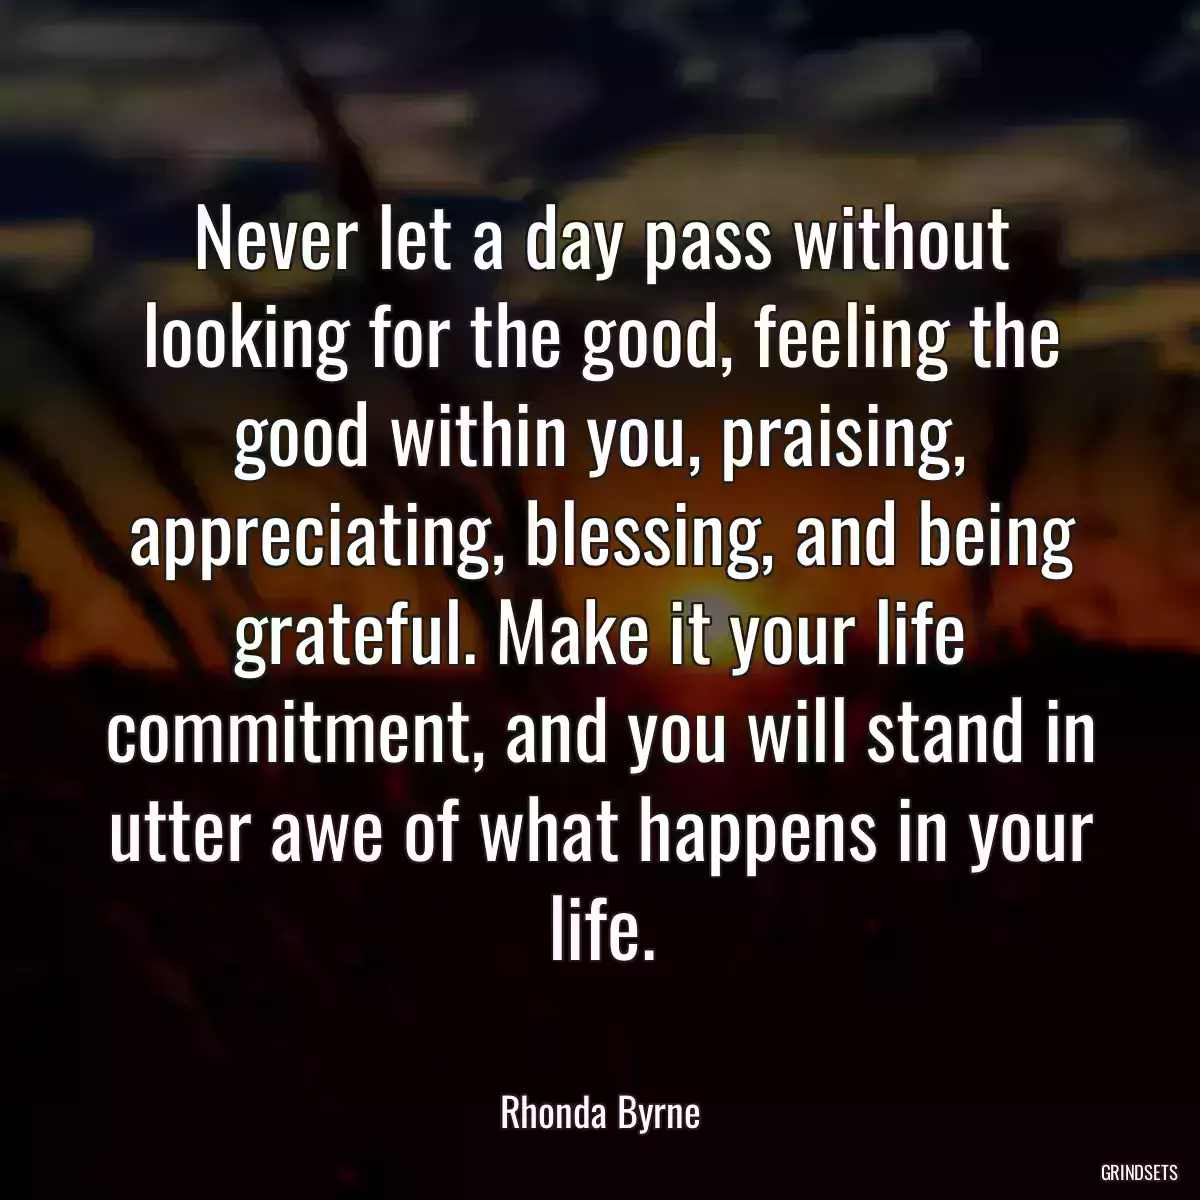 Never let a day pass without looking for the good, feeling the good within you, praising, appreciating, blessing, and being grateful. Make it your life commitment, and you will stand in utter awe of what happens in your life.